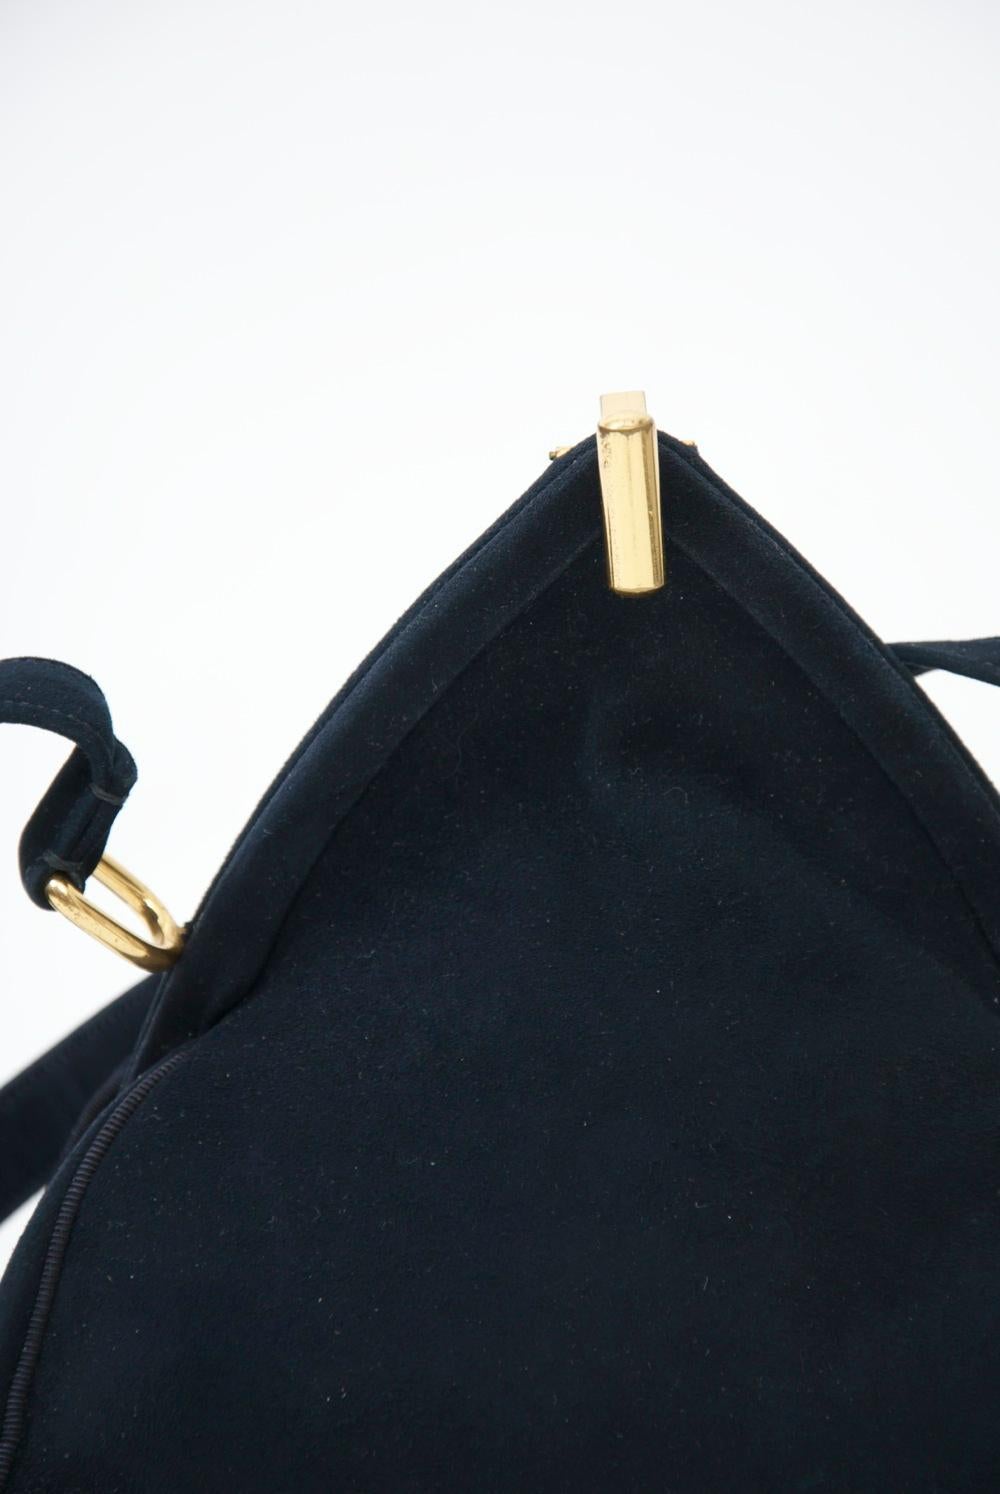 Vintage navy suede handbag in an unusual triangular shape and nice hardware, including the flip-up clasp. A single strap is attached to matching metal elements mounted at right angles to the suede-wrapped frame. Interior is navy satin with side